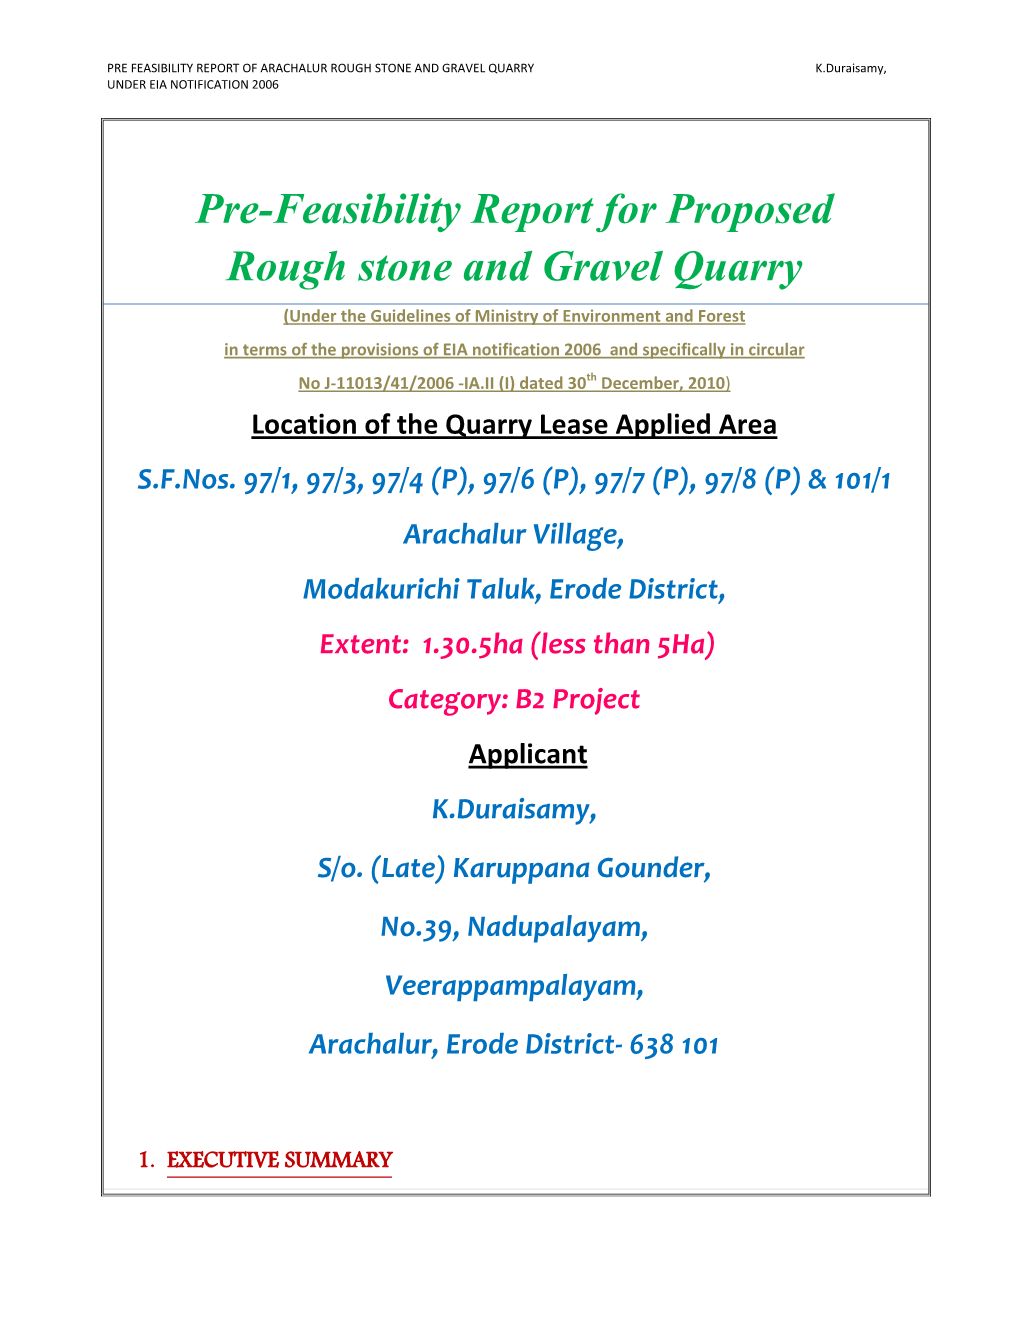 Pre-Feasibility Report for Proposed Rough Stone and Gravel Quarry